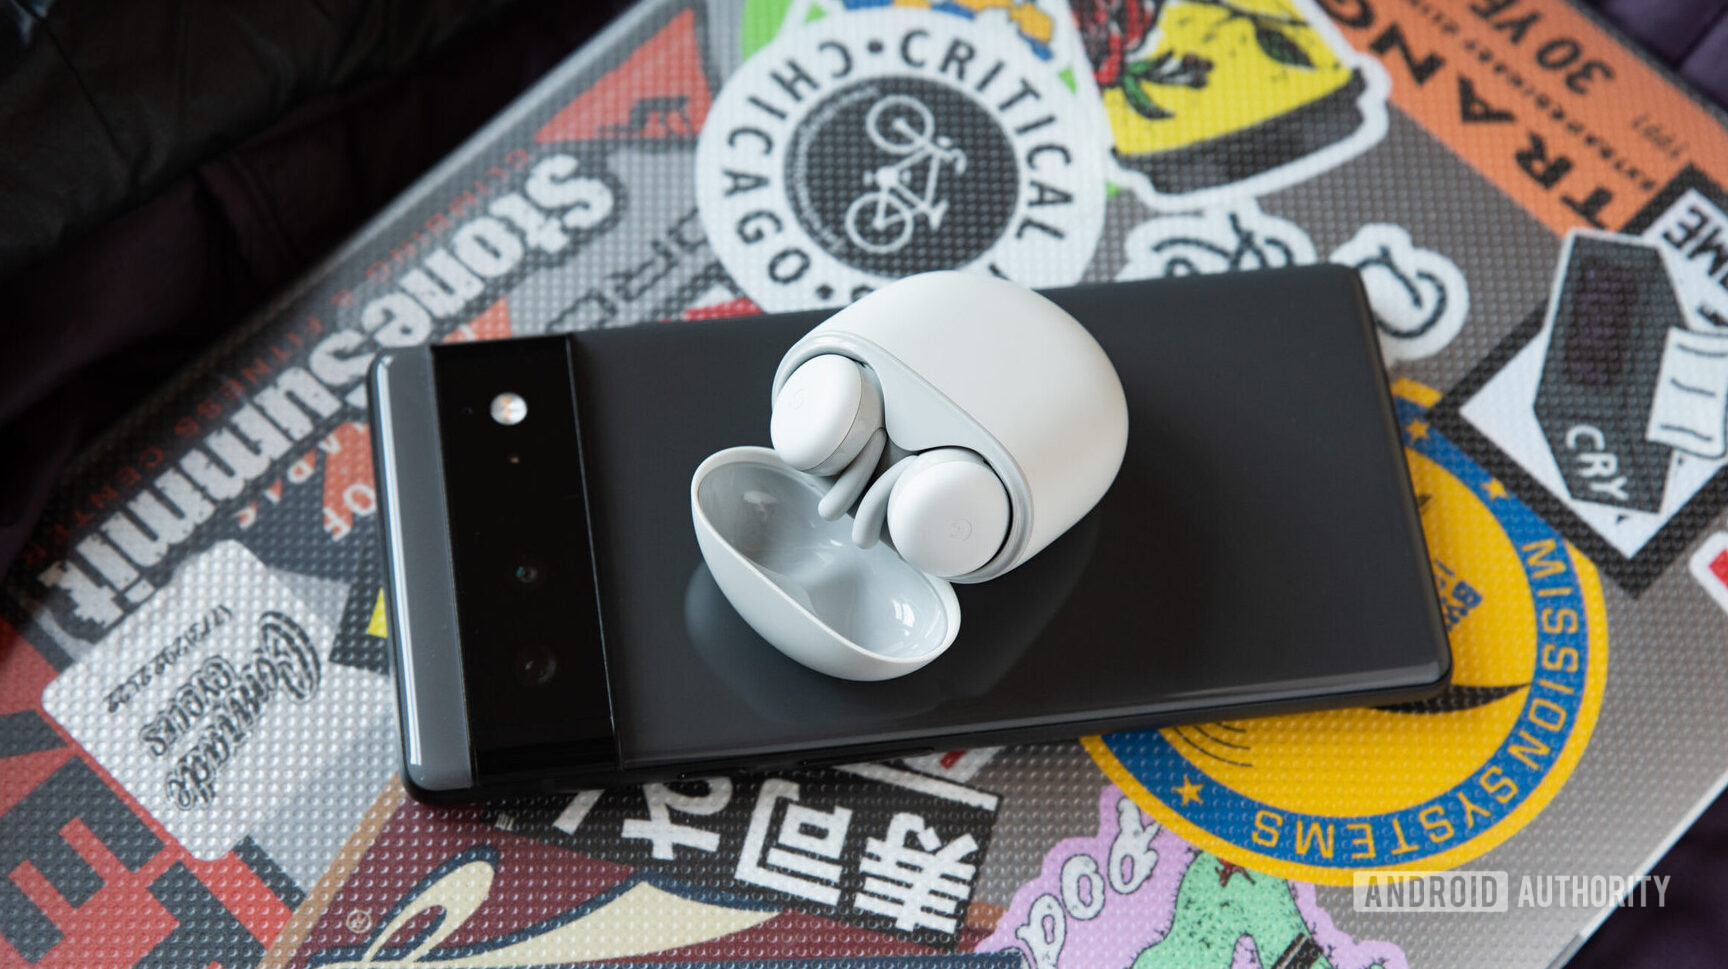 The Google Pixel Buds A-Series earbuds and case on a Pixel 6 phone.